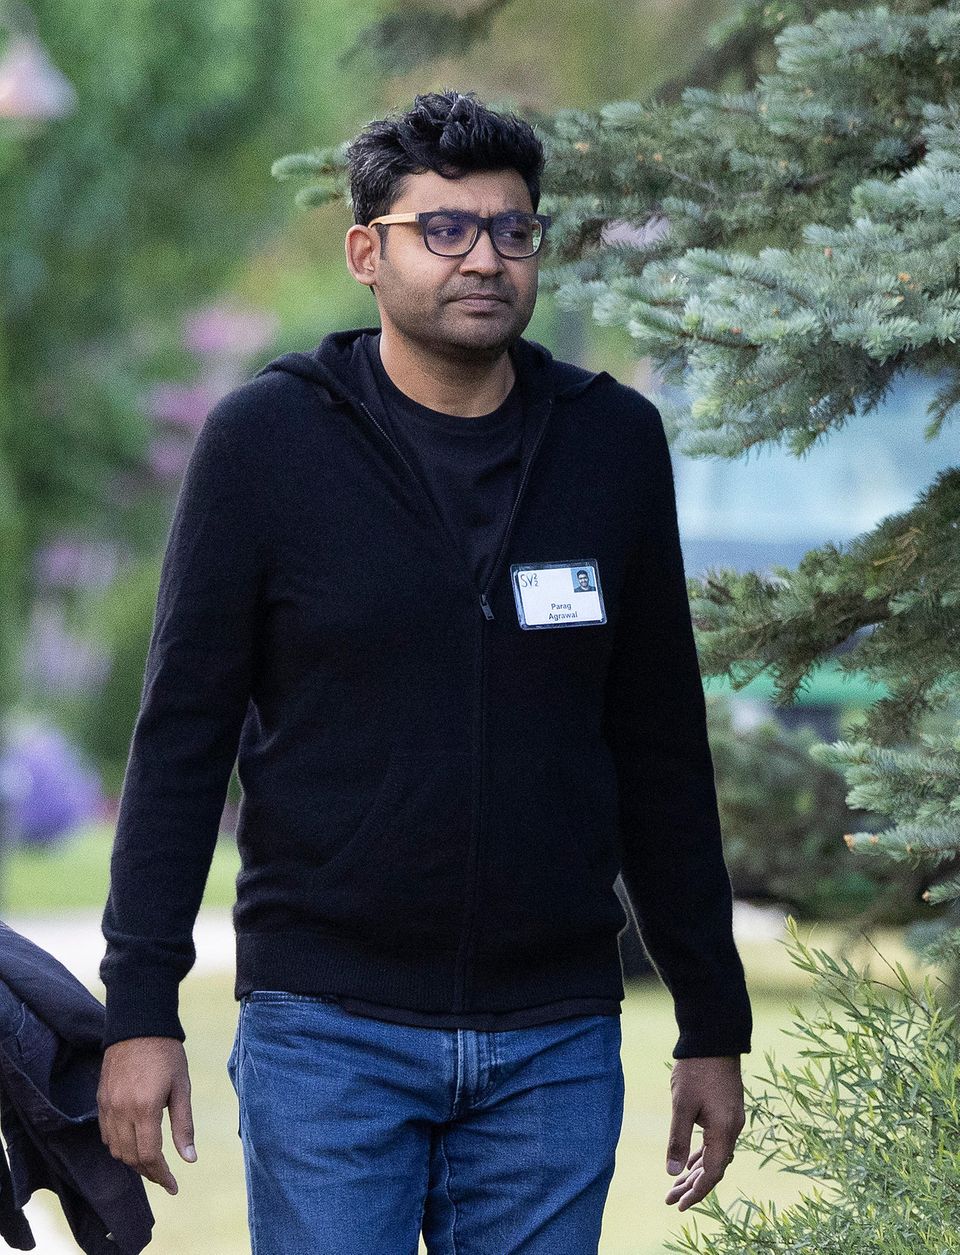 Twitter-CEO Parag Agrawal